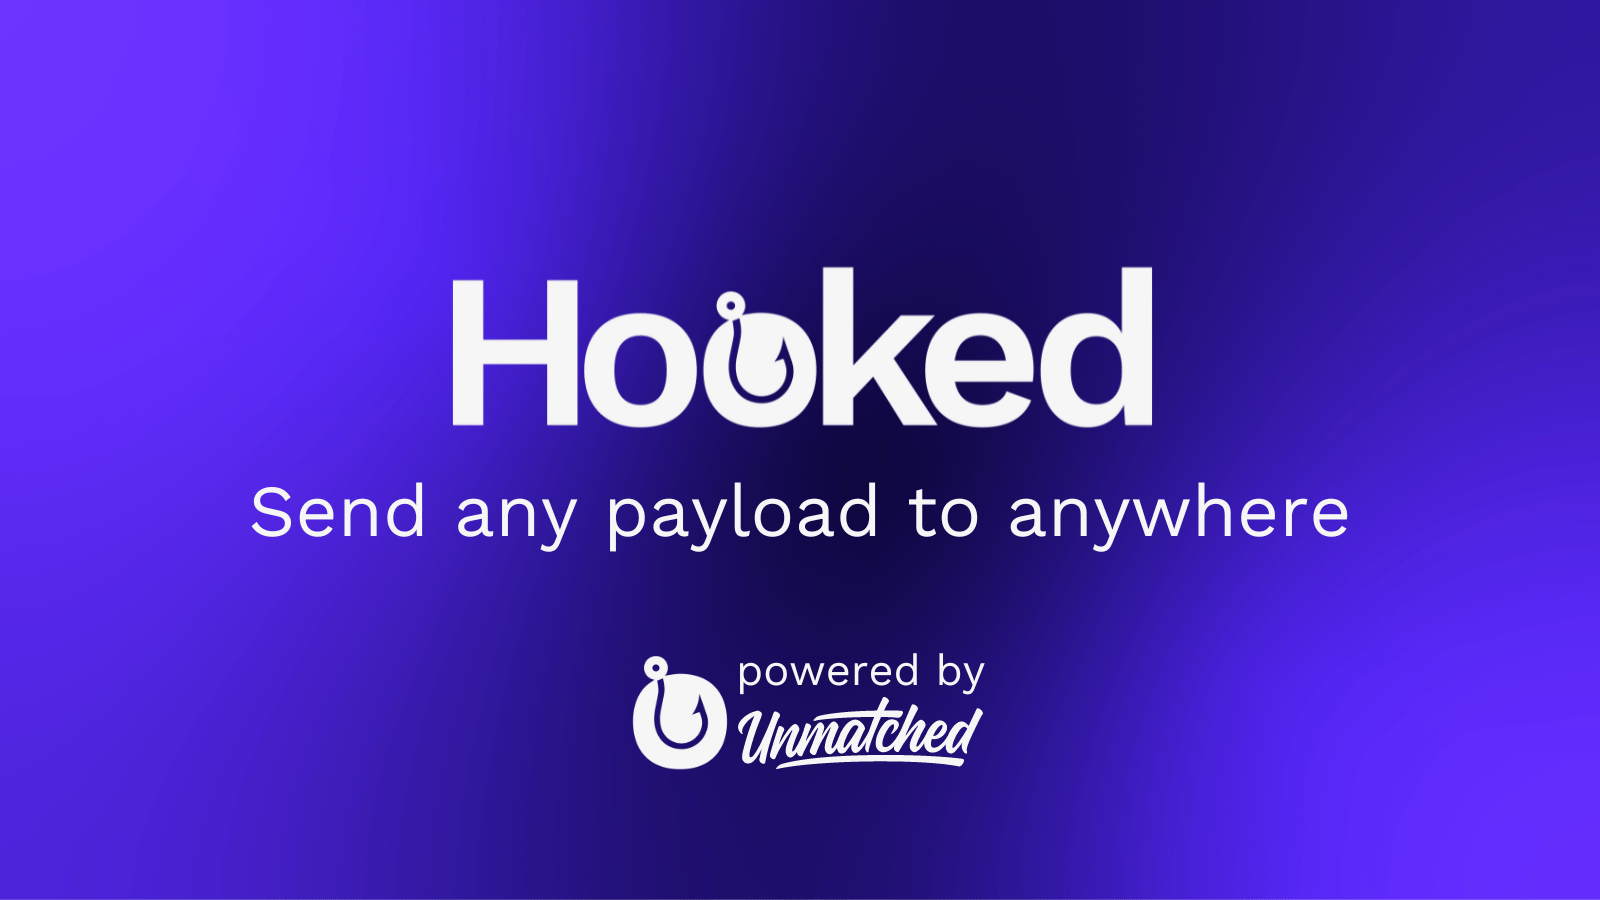 Send a payload to anywhere using hooked - powered by unmatched